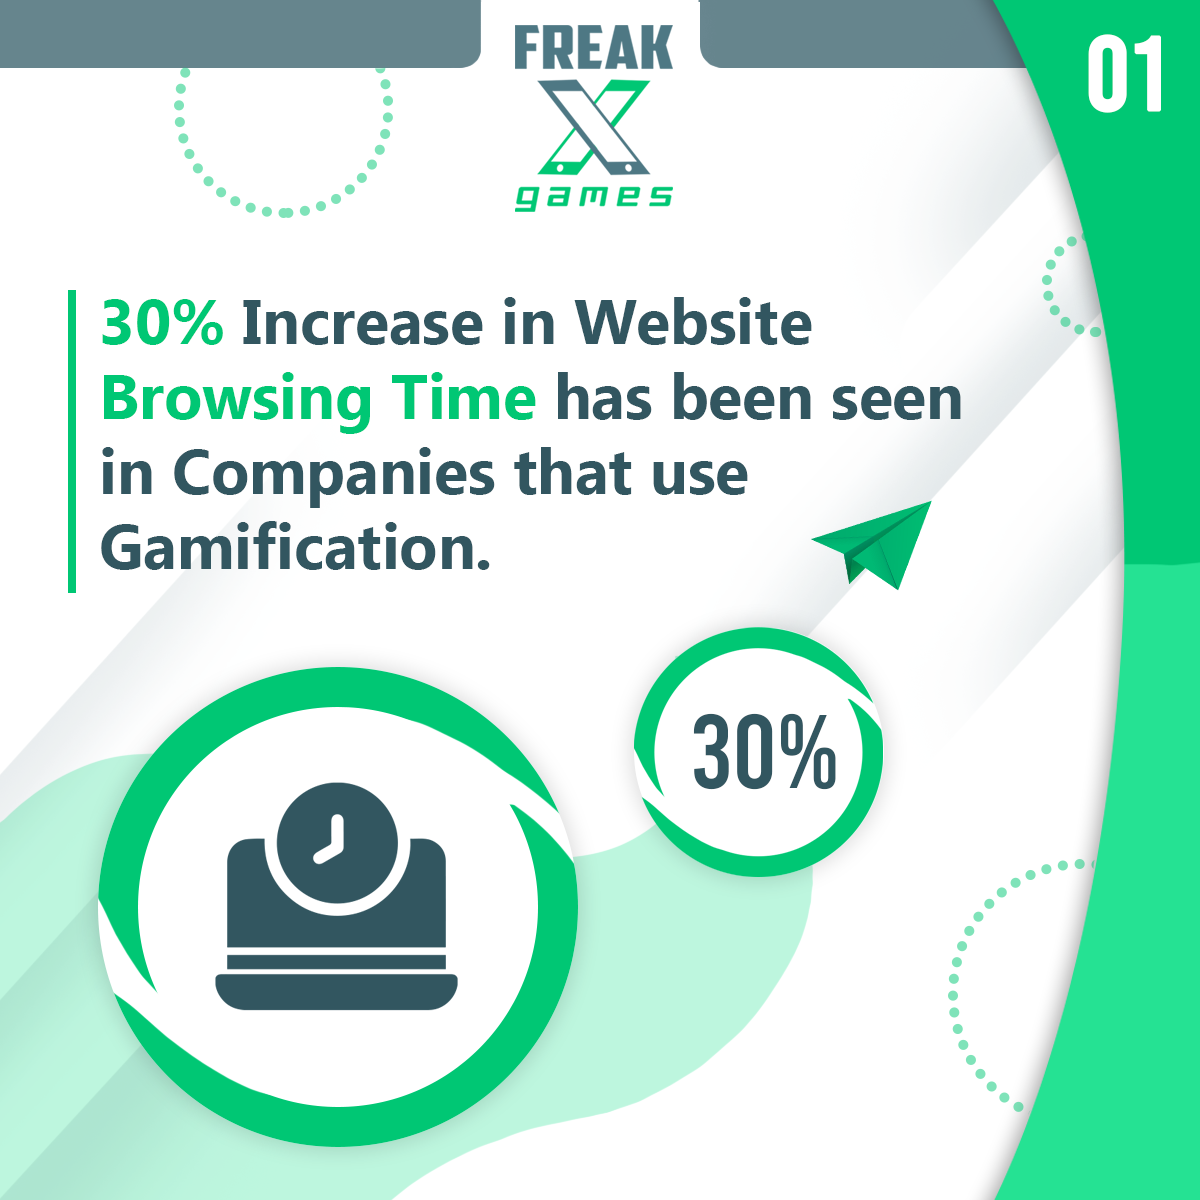 Gamification of business increases website browsing time by 30%